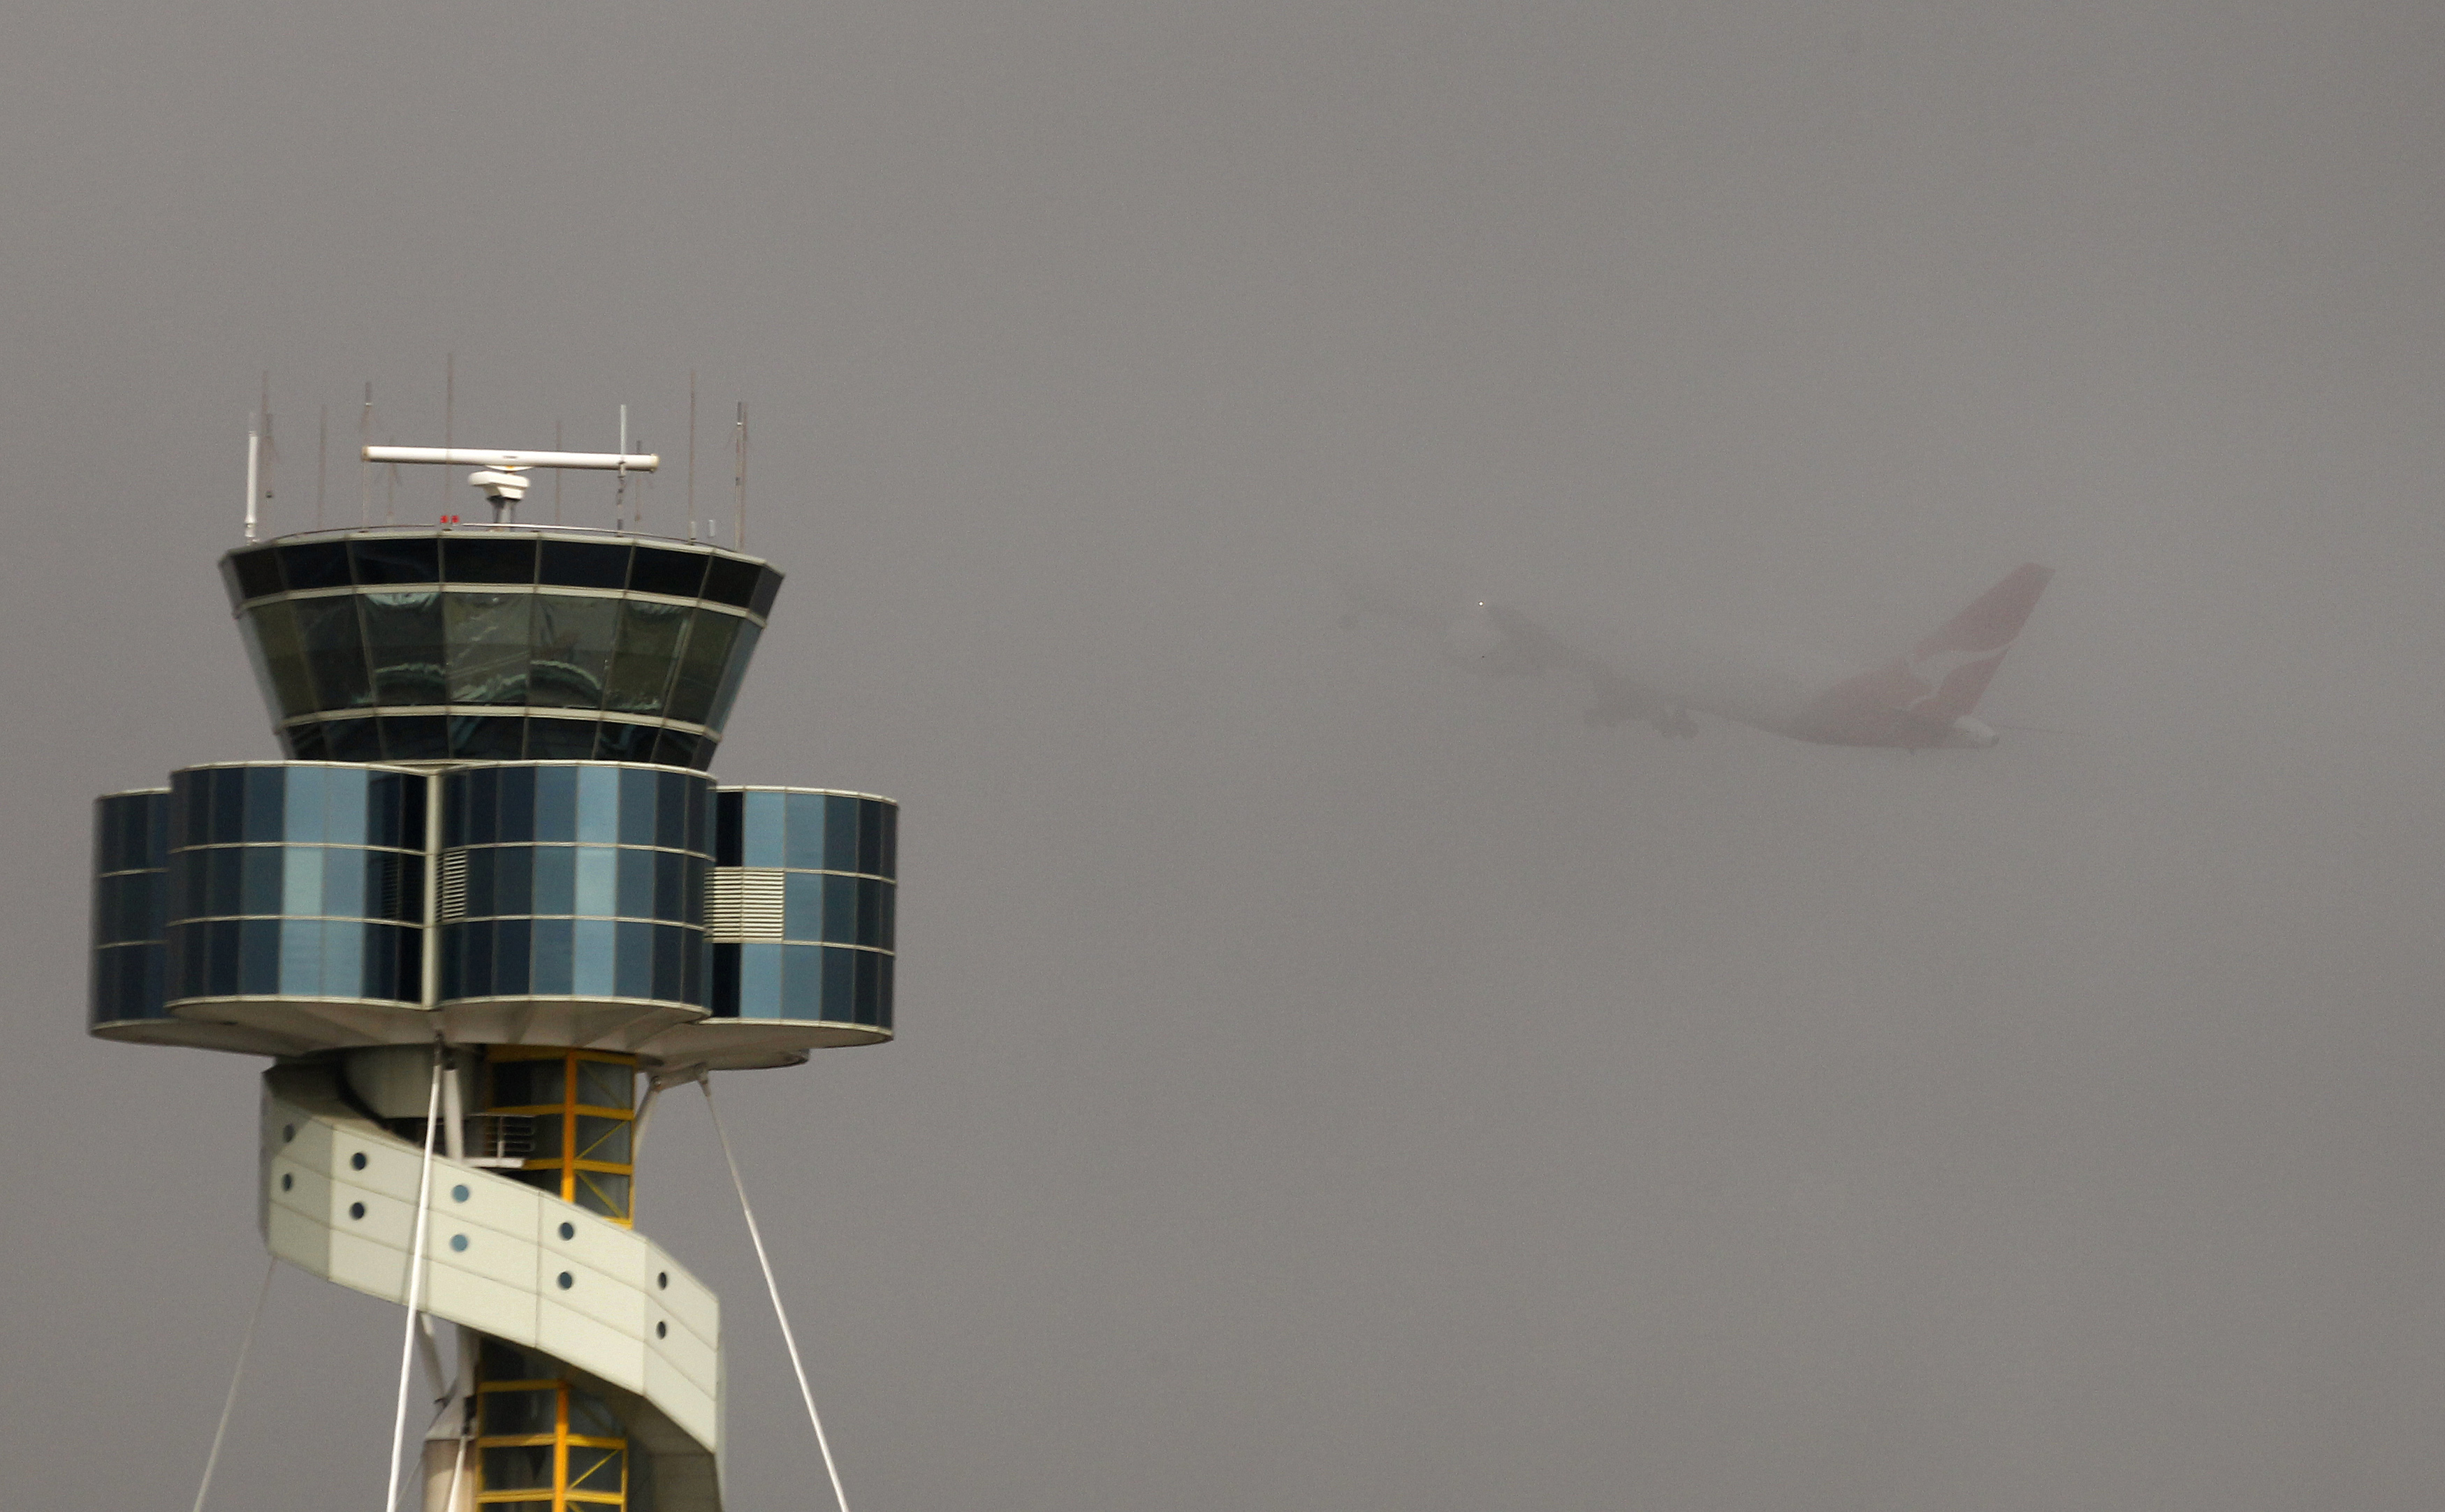 A Qantas plane takes off from Sydney airport amidst thick fog on May 29, 2013. (Daniel Munozz—Reuters)